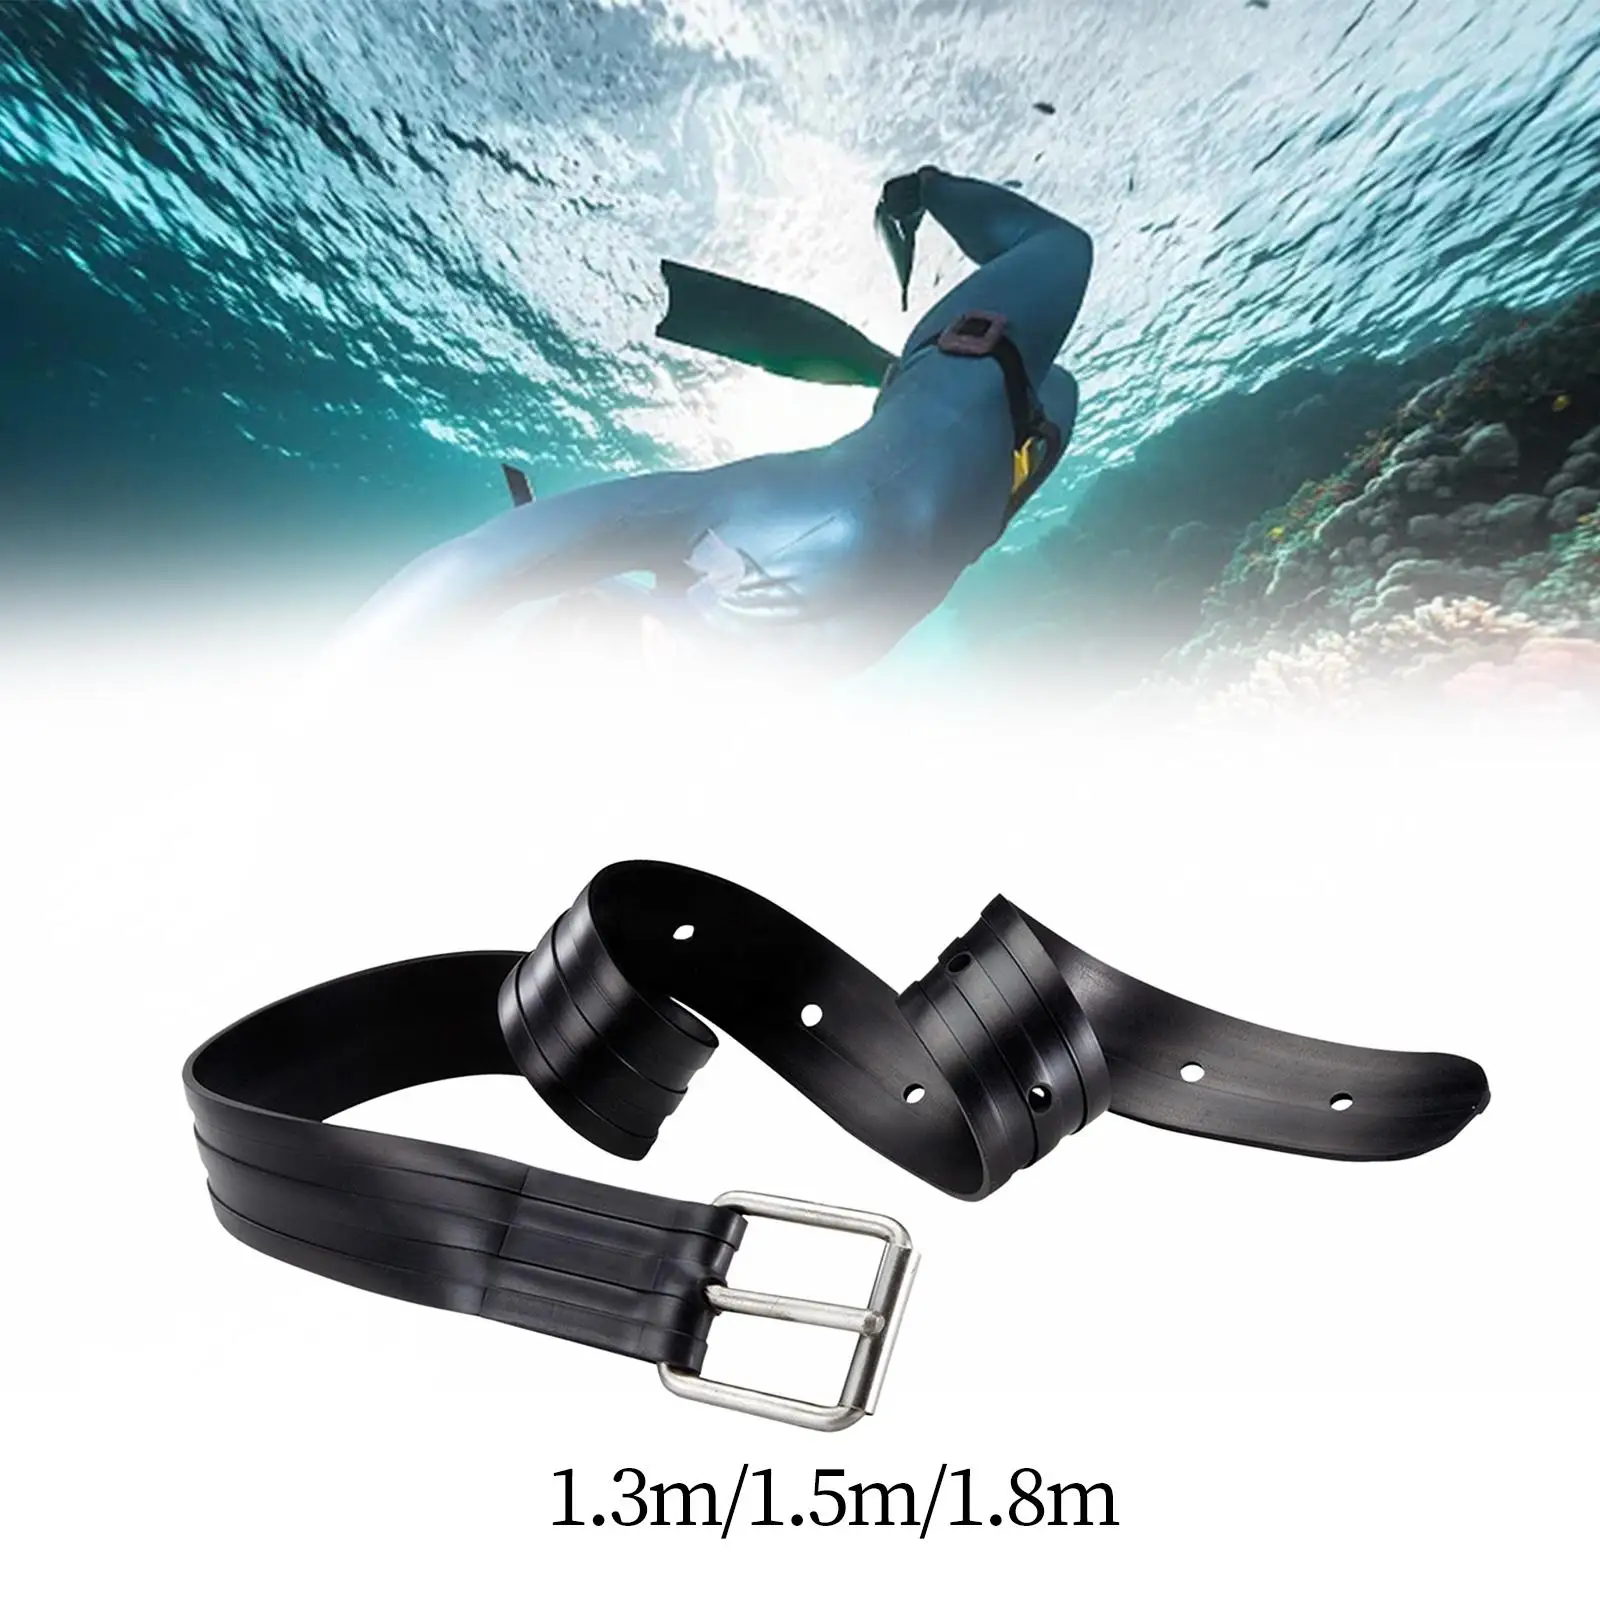 Weight Diving Belt with Buckle Webbing Weight Strap Belts for Spearfishing Scuba Diving Snorkeling Underwater Sport Free Diving